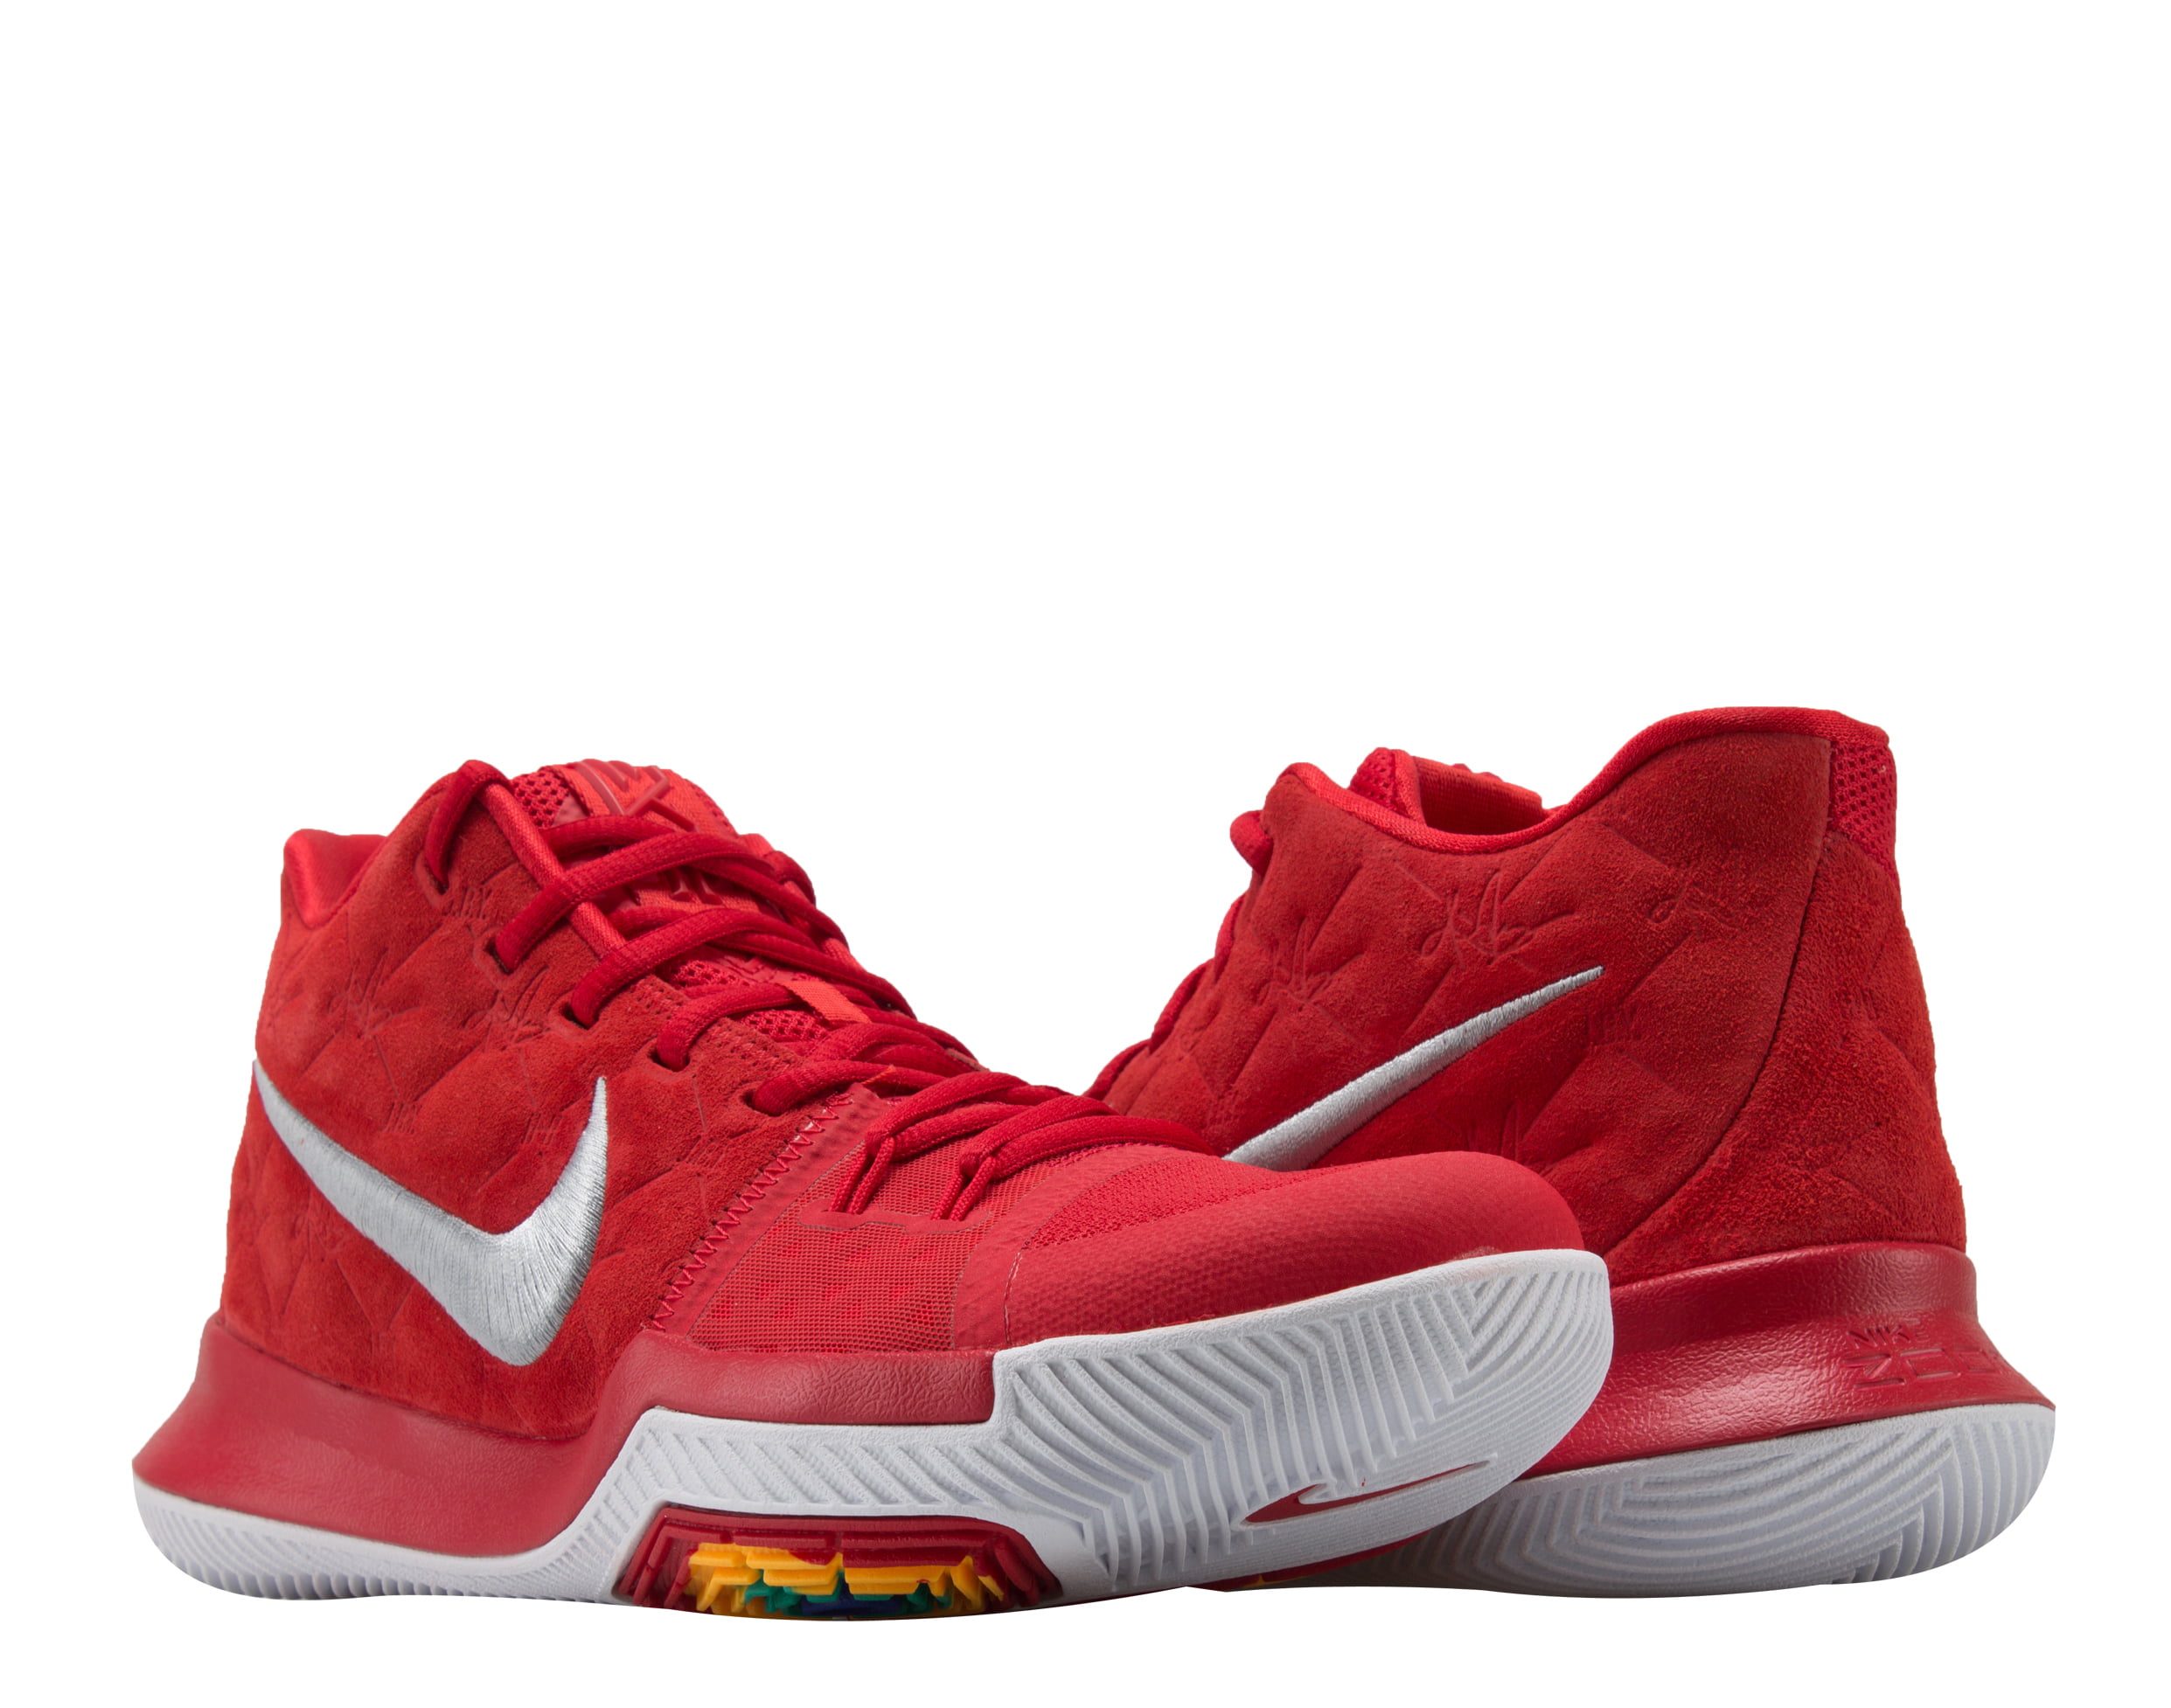 Nike Kyrie 3 University Red Yellow Men, Kyrie Fire Pit